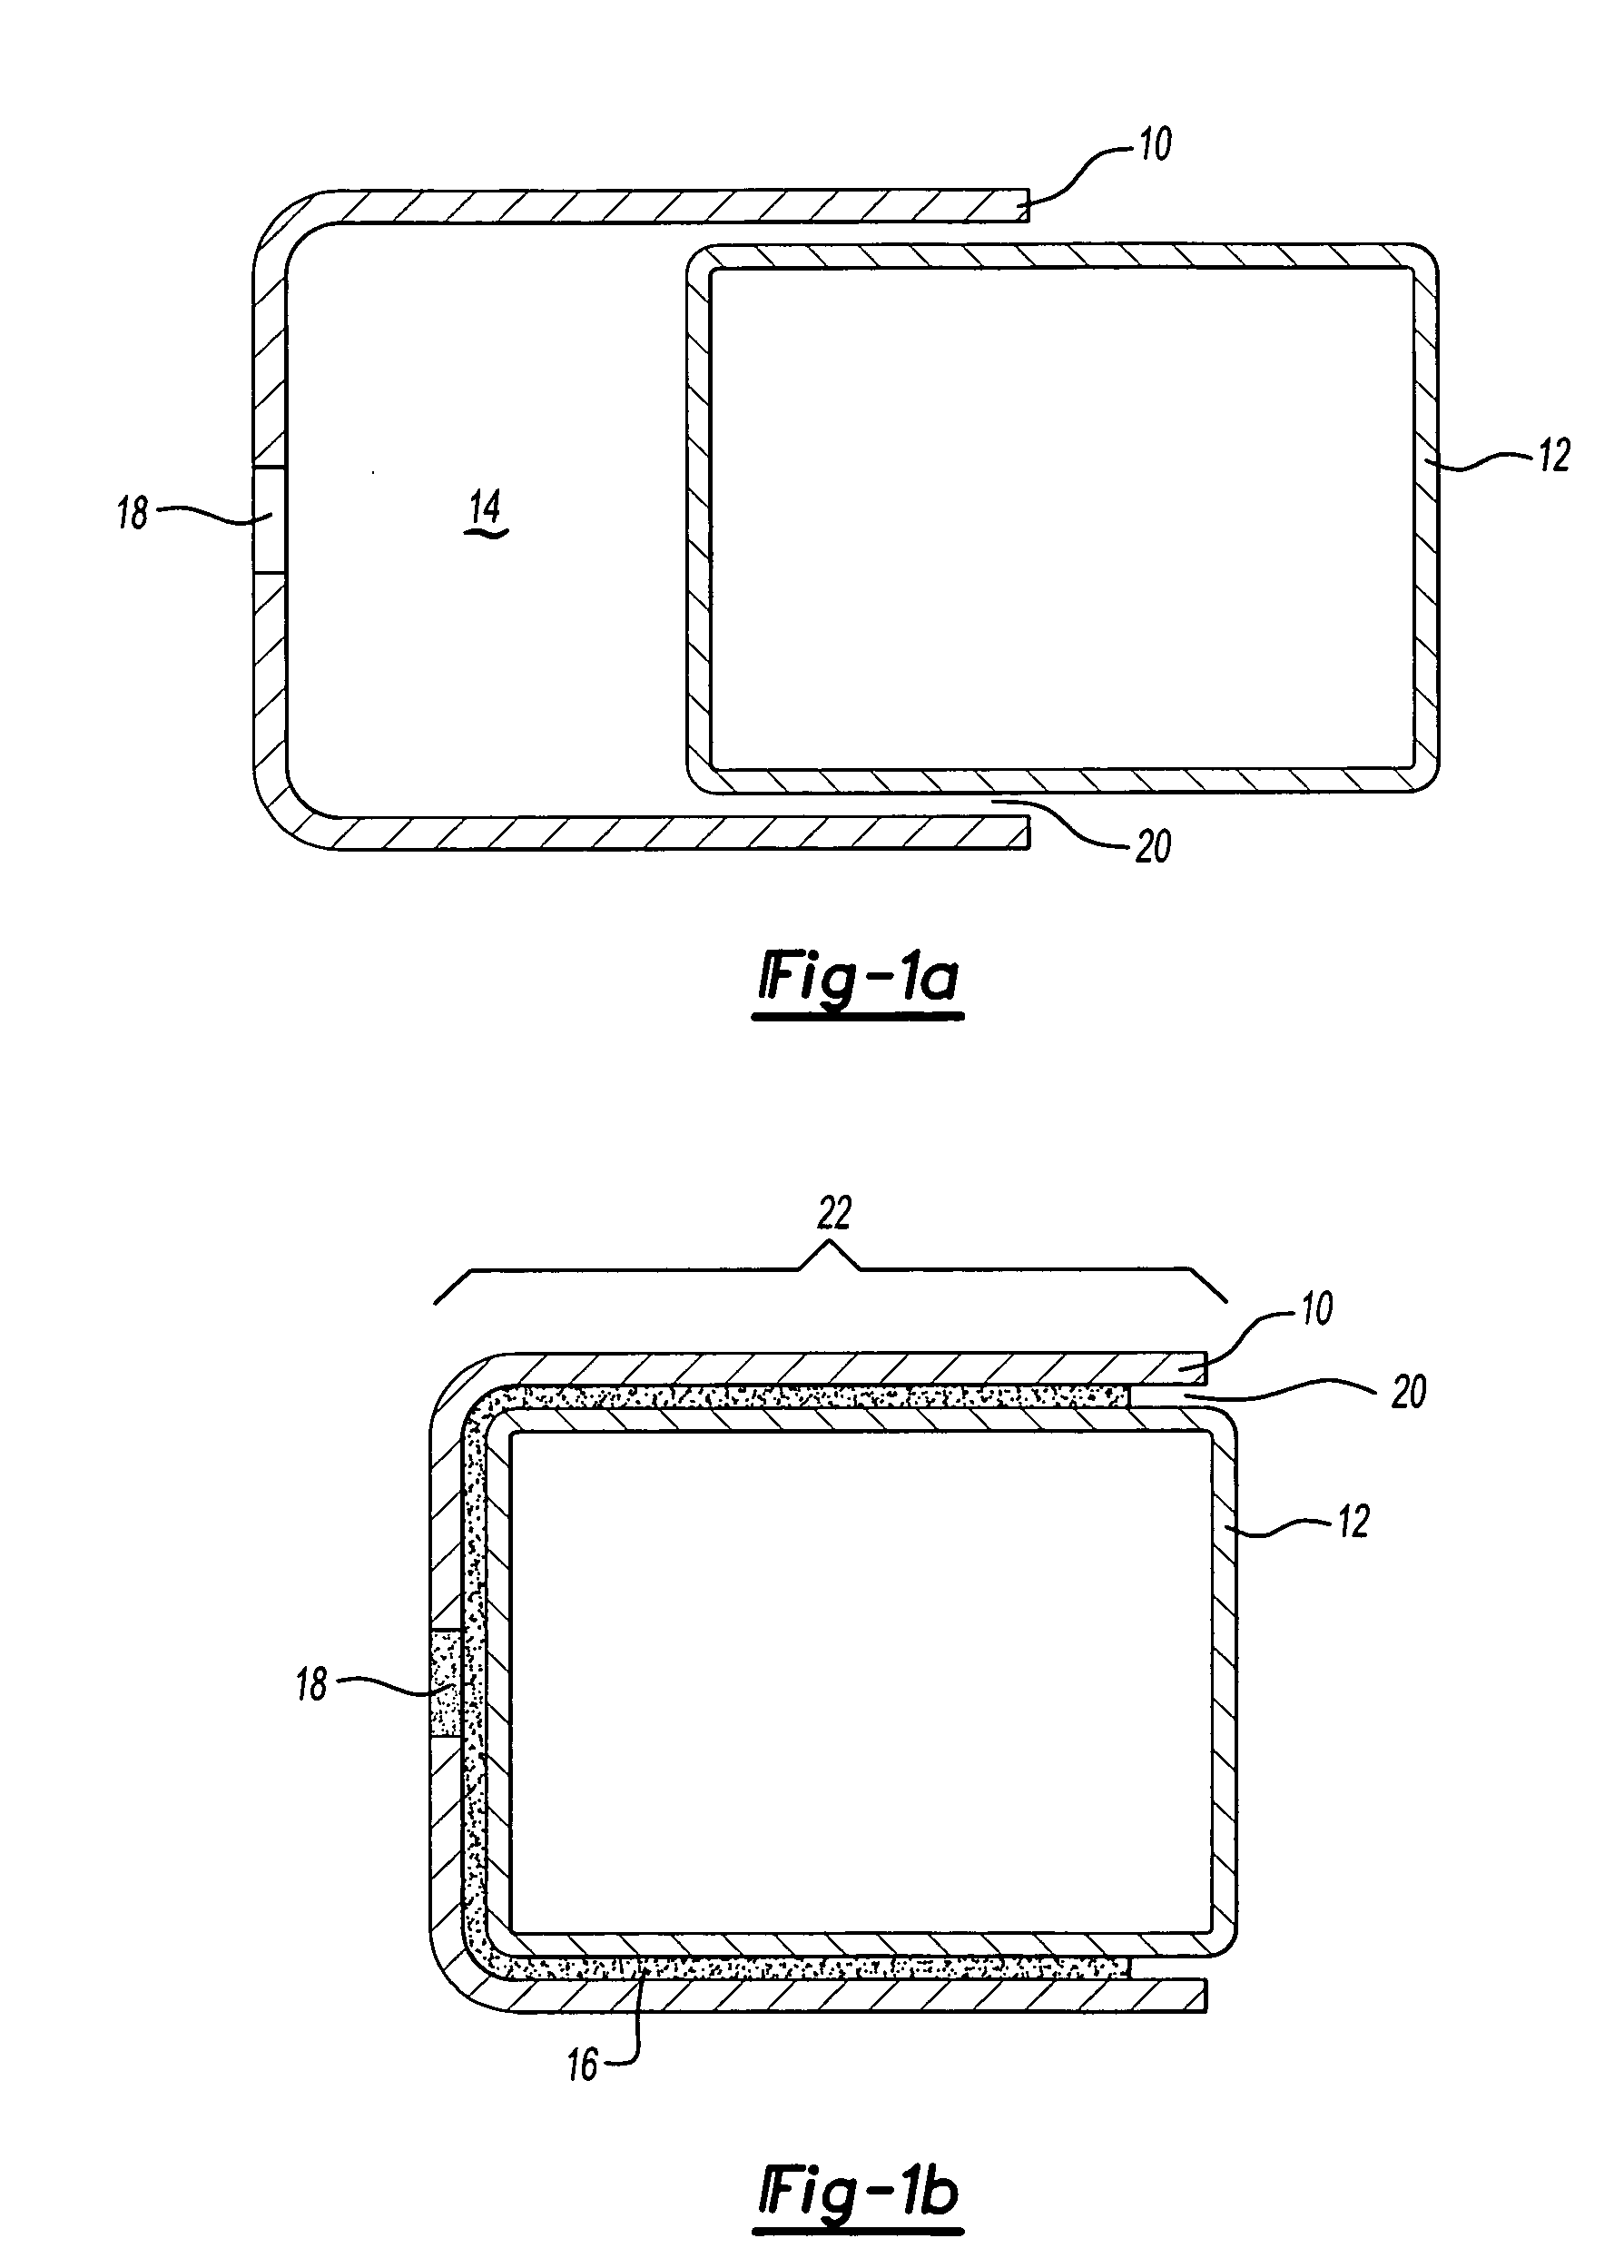 Method of attaching components and article formed using same